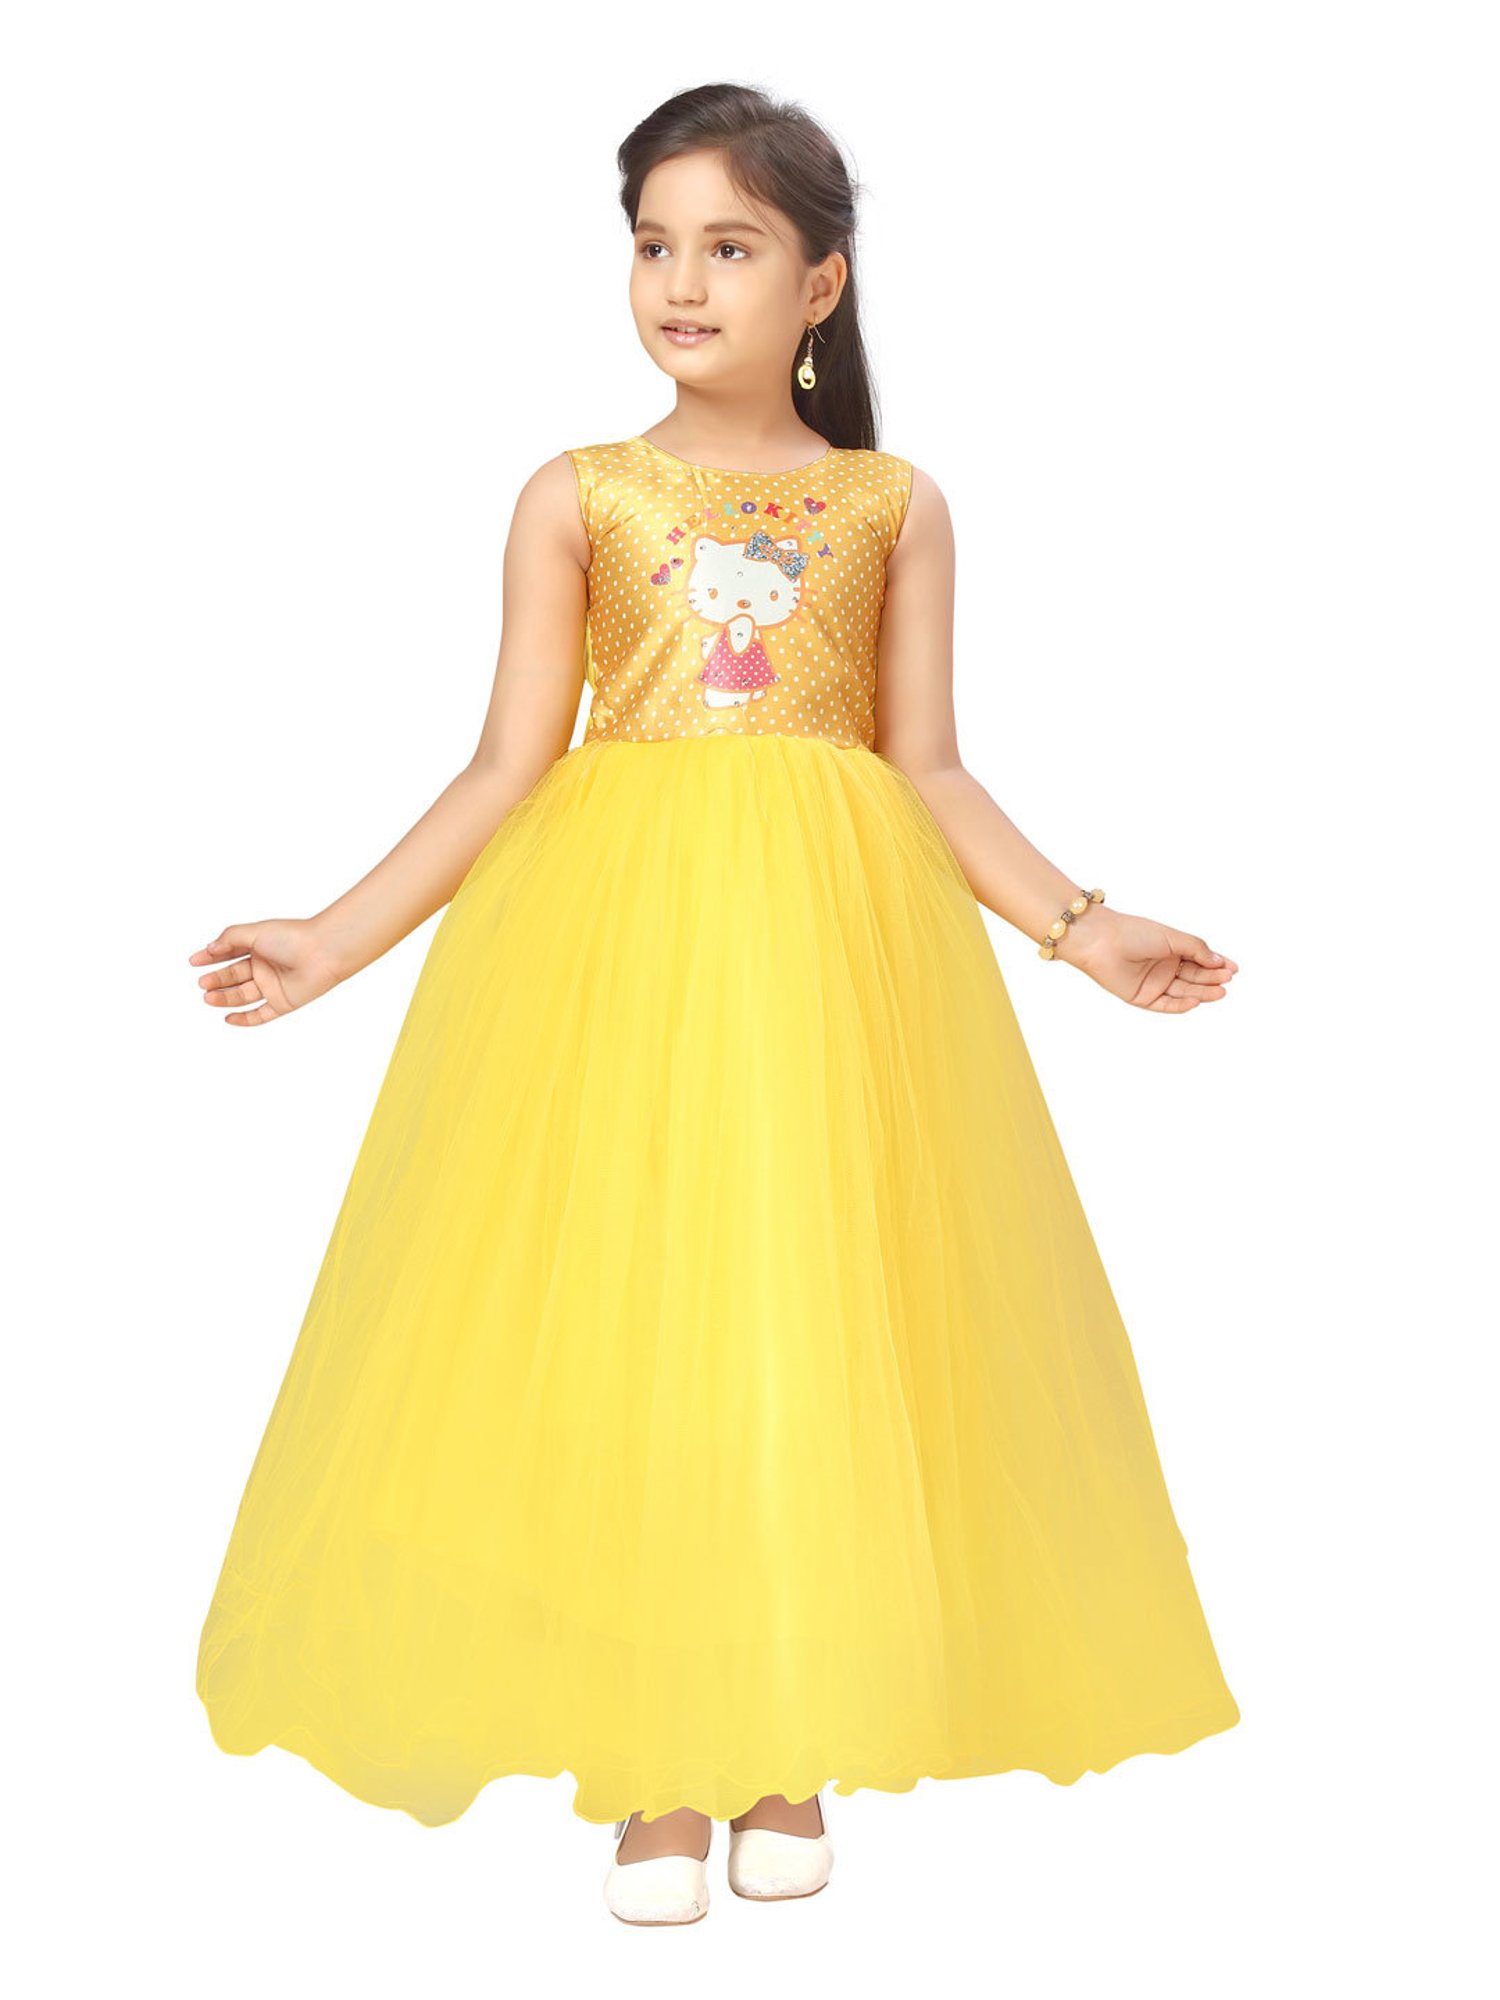 2023 Summer Long Sleeve Kids Party Dress For Girls Children Costume Lace  Princess Dresses Girl Party Yellow Dress Birthd